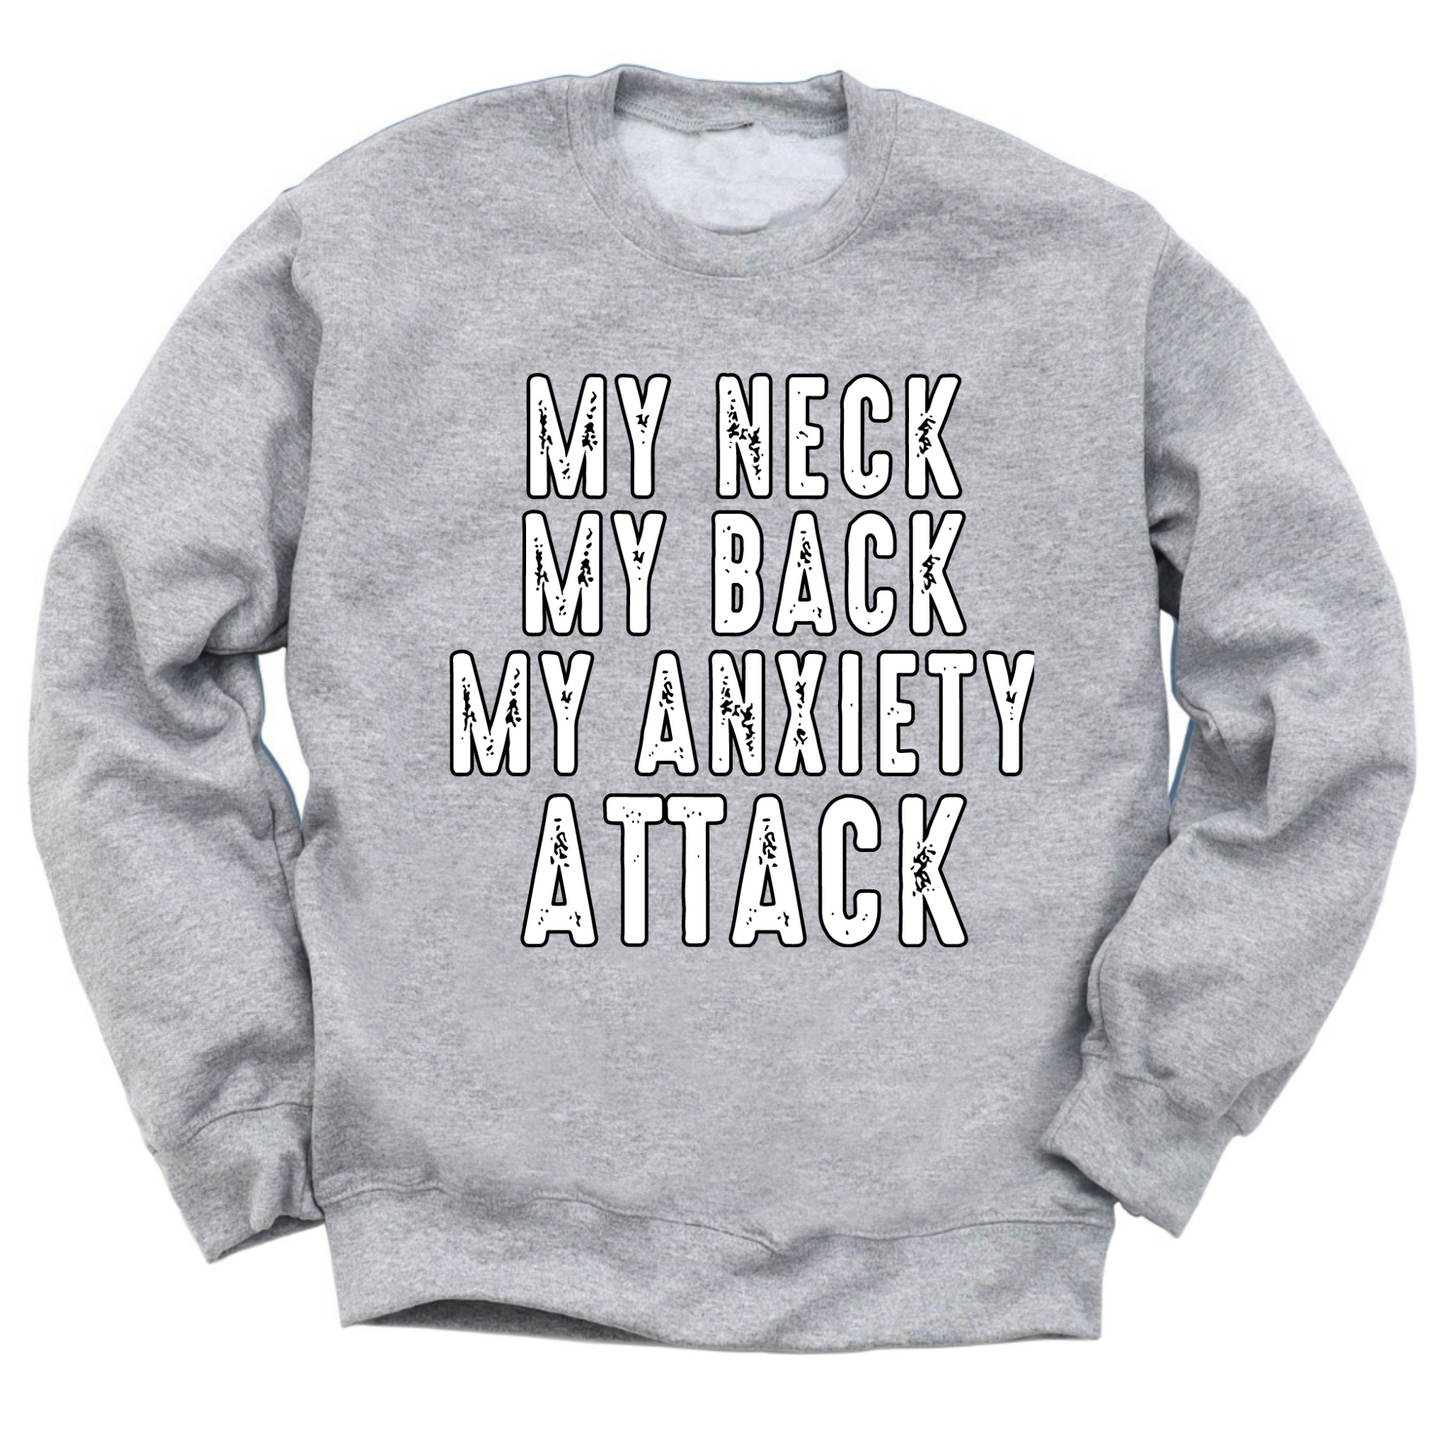 My Neck My Back My Anxiety Attack Crewneck Sweater